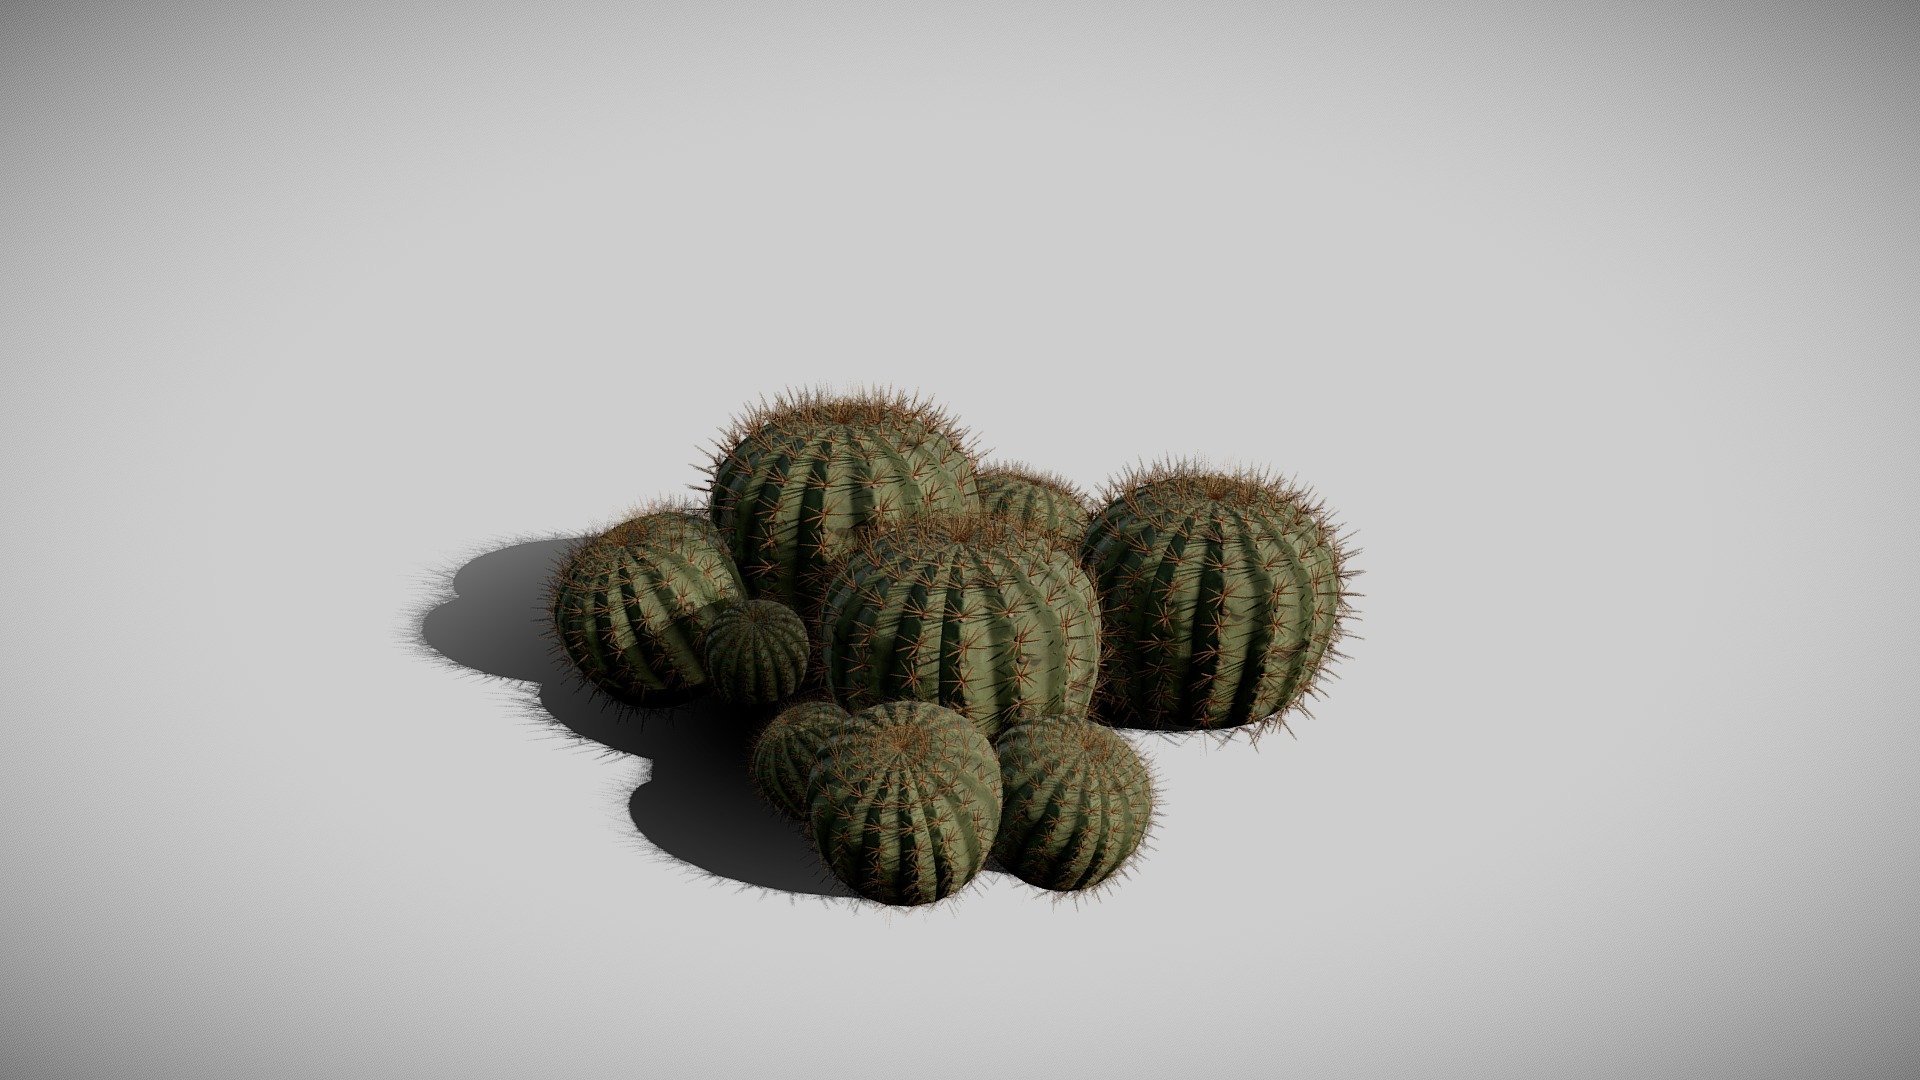 Details:

fbx files

Low Poly Model

LODs (Game Ready)

3 Variations

4K textures

Spine Color Variation

LODs Sample: https://sketchfab.com/3d-models/cactus-lods-sample-47f7251a654244fcbc0ea01e152406e7 

Contact me for any issue or questions https://www.artstation.com/bpaul/profile - Biznaga (Cactus) - Buy Royalty Free 3D model by Paul (@nathan.d1563) 3d model